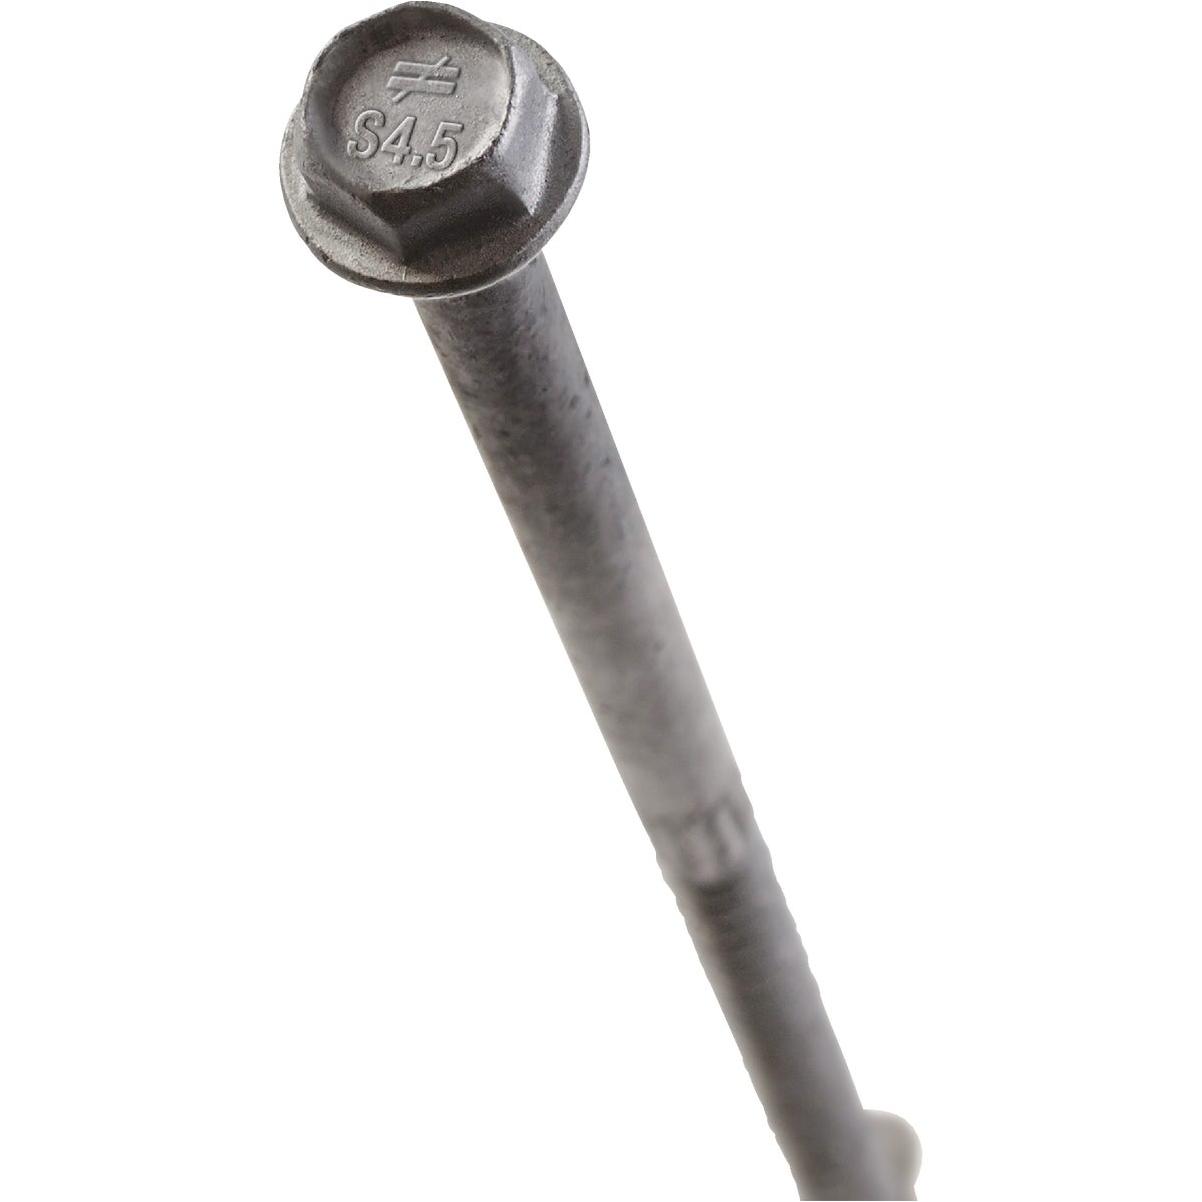 Simpson Strong-Tie #9 2-1/2 In. Hex Structure Screw Near Me